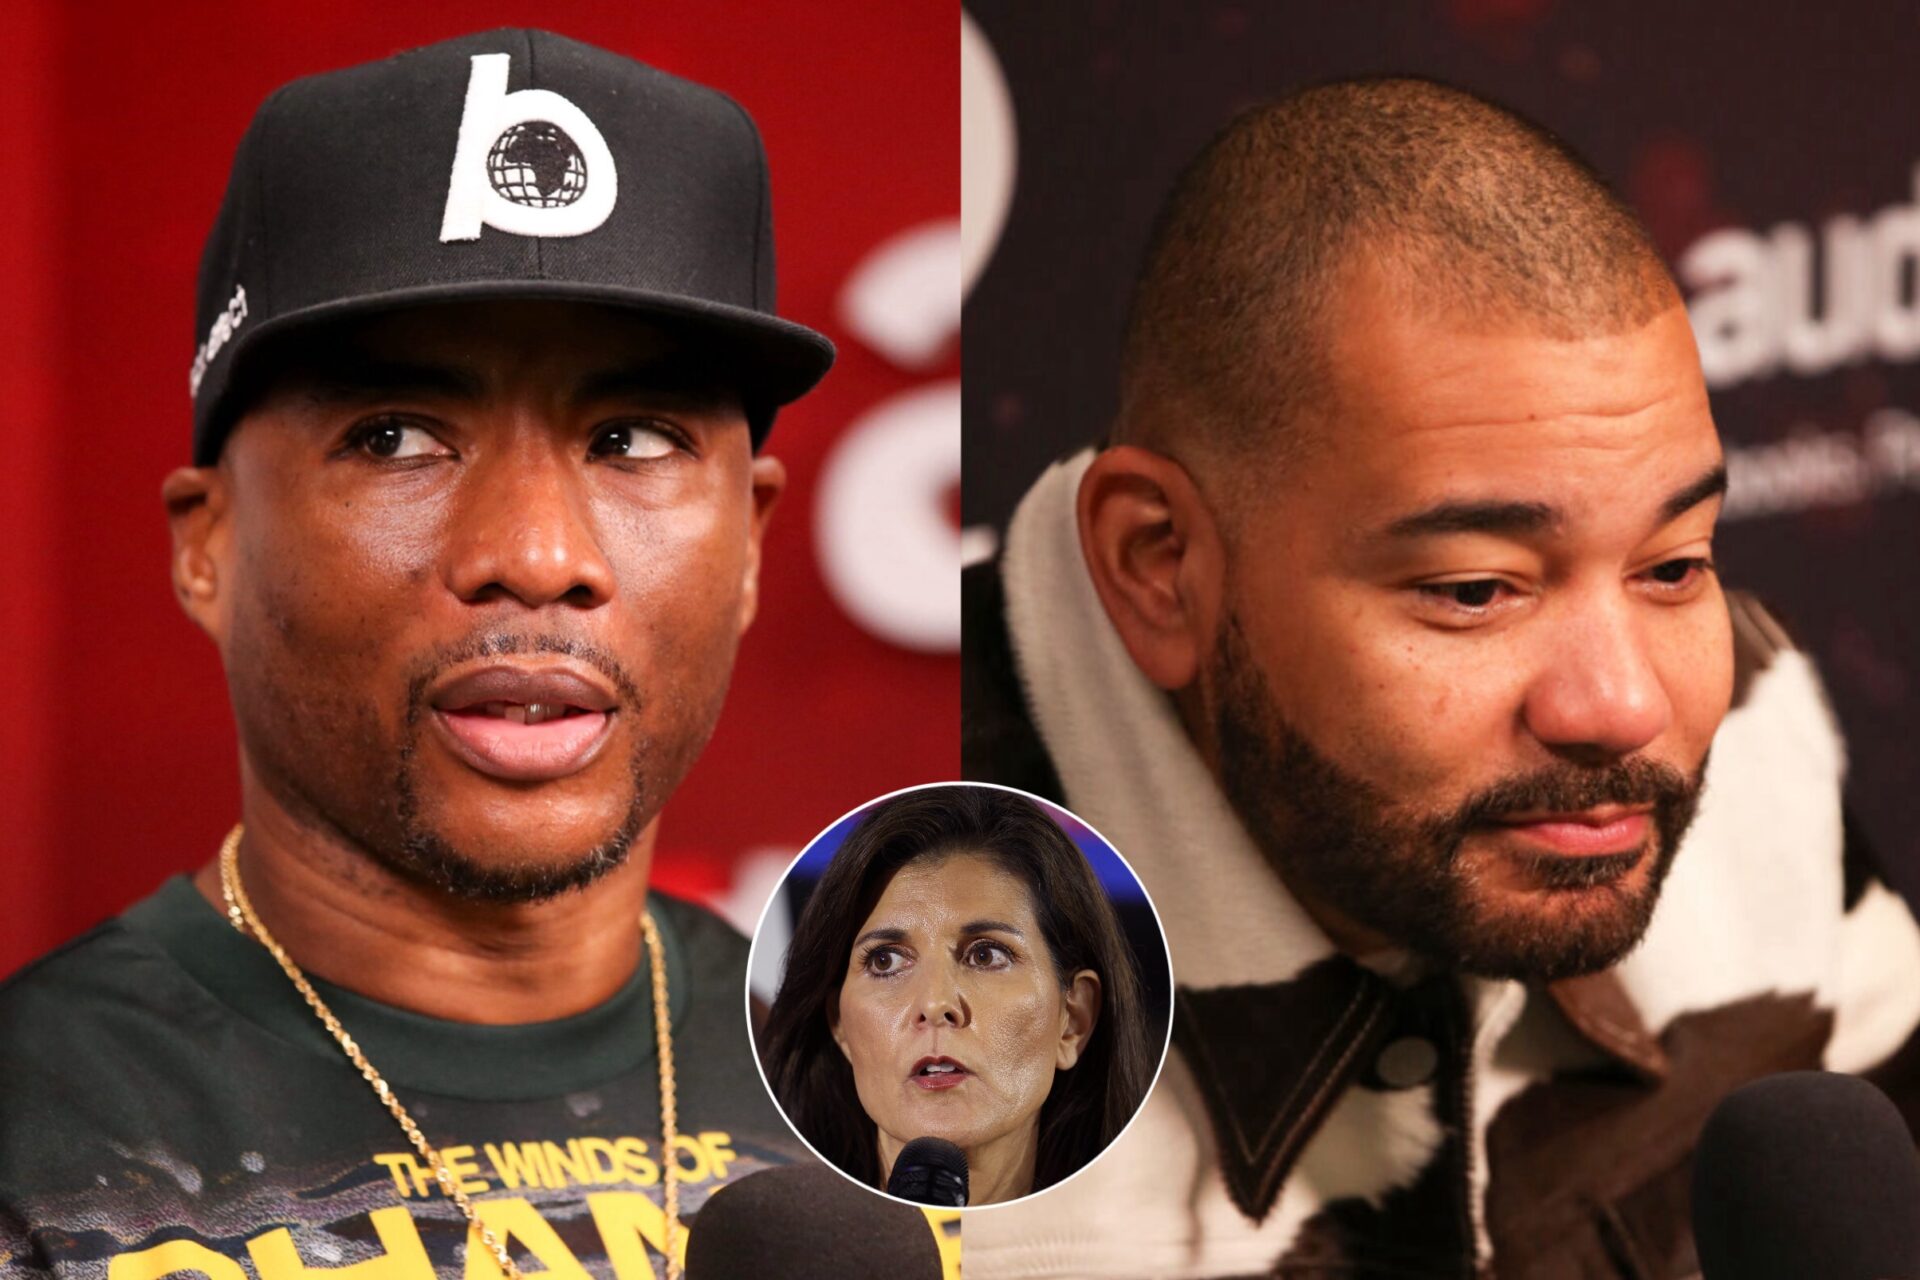 Charlamagne And DJ Envy Face Backlash For Interviewing Nikki Haley On ‘The Breakfast Club’